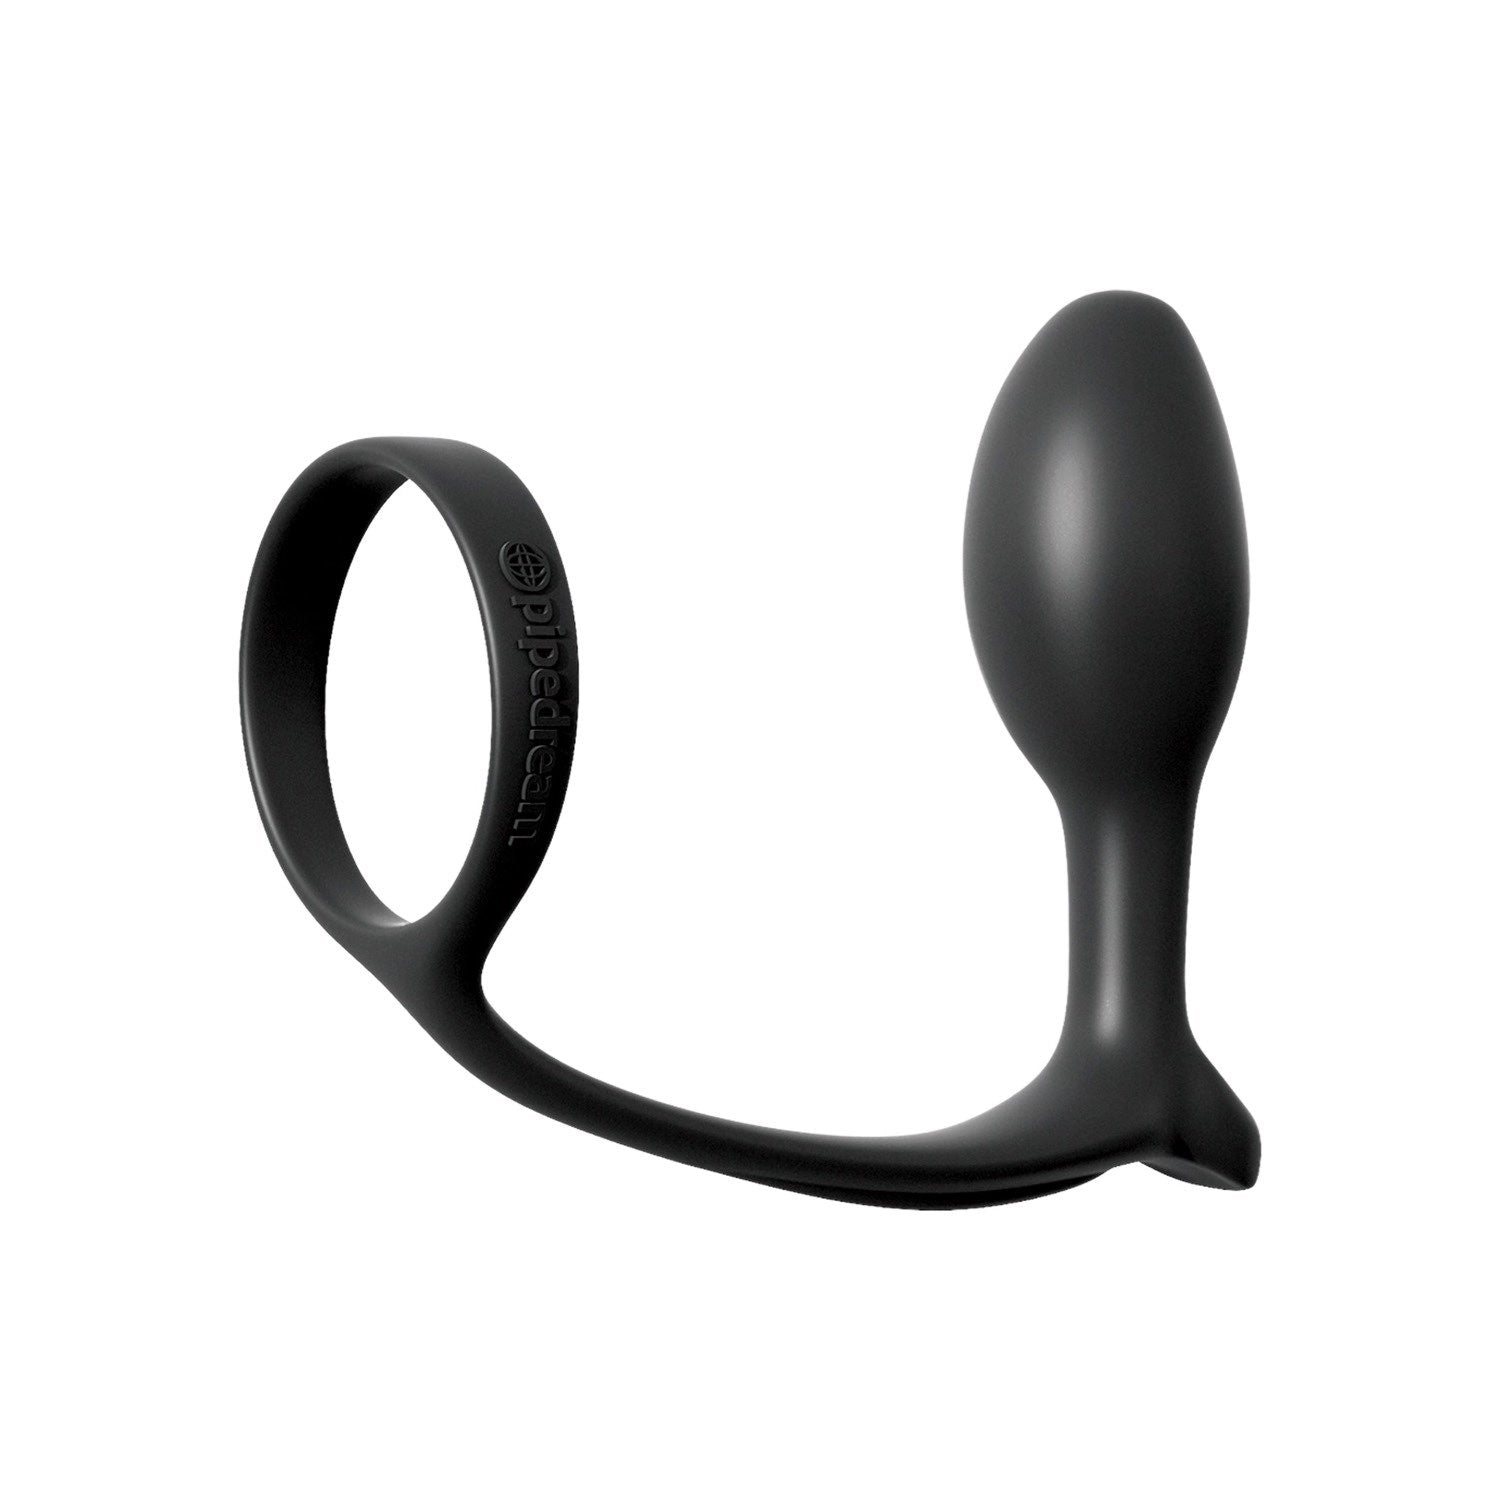 Anal Fantasy Collection Ass-Gasm Cock Ring Beginners Plug - Black Cock Ring with Anal Plug by Pipedream